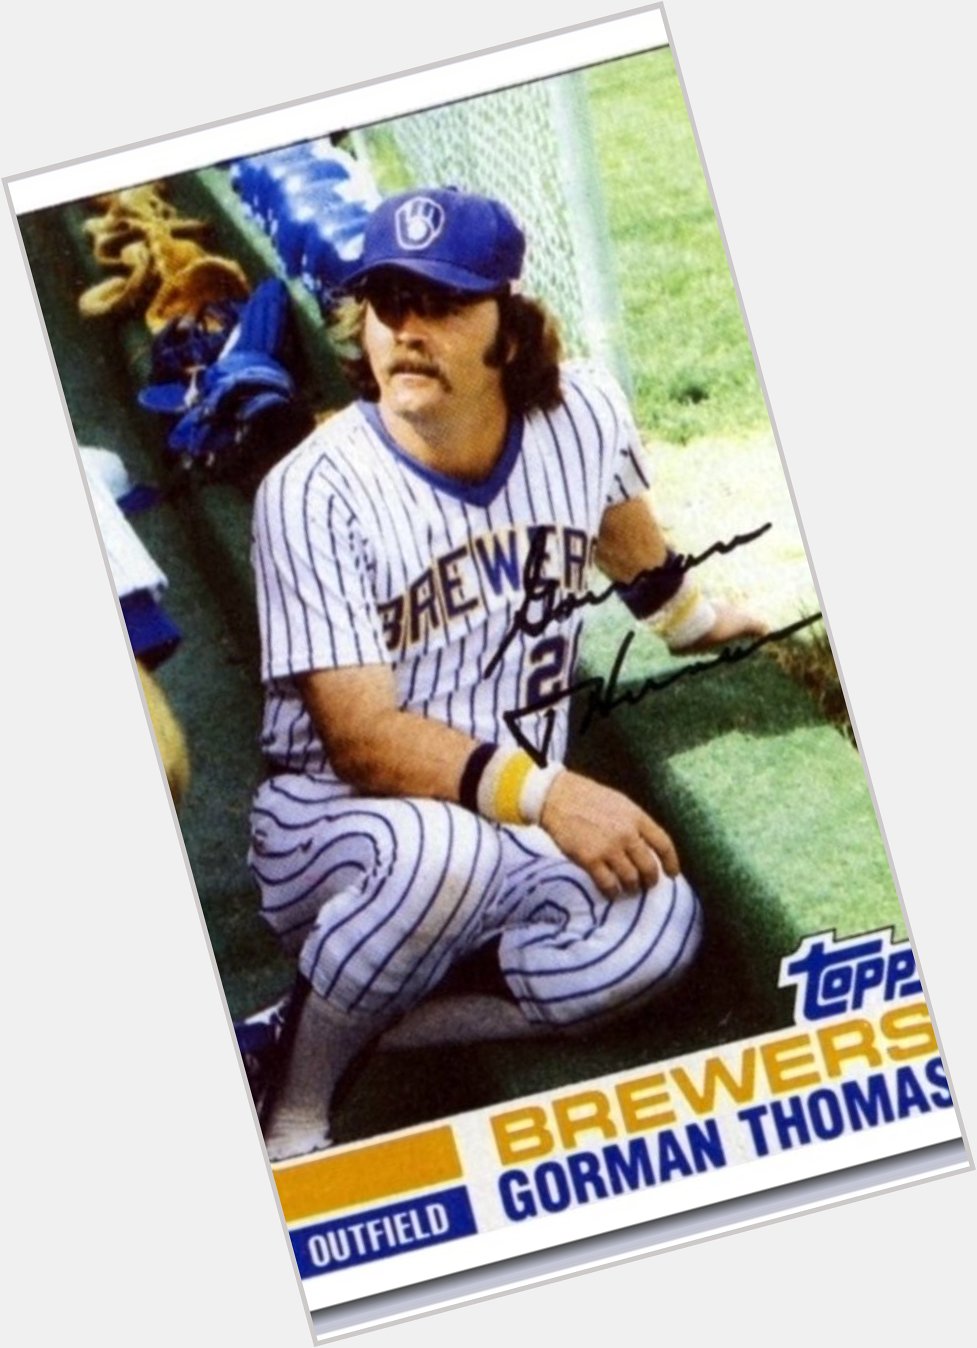 Happy 68th birthday to my old friend and teammate and former major league home run slugger Gorman Thomas. 